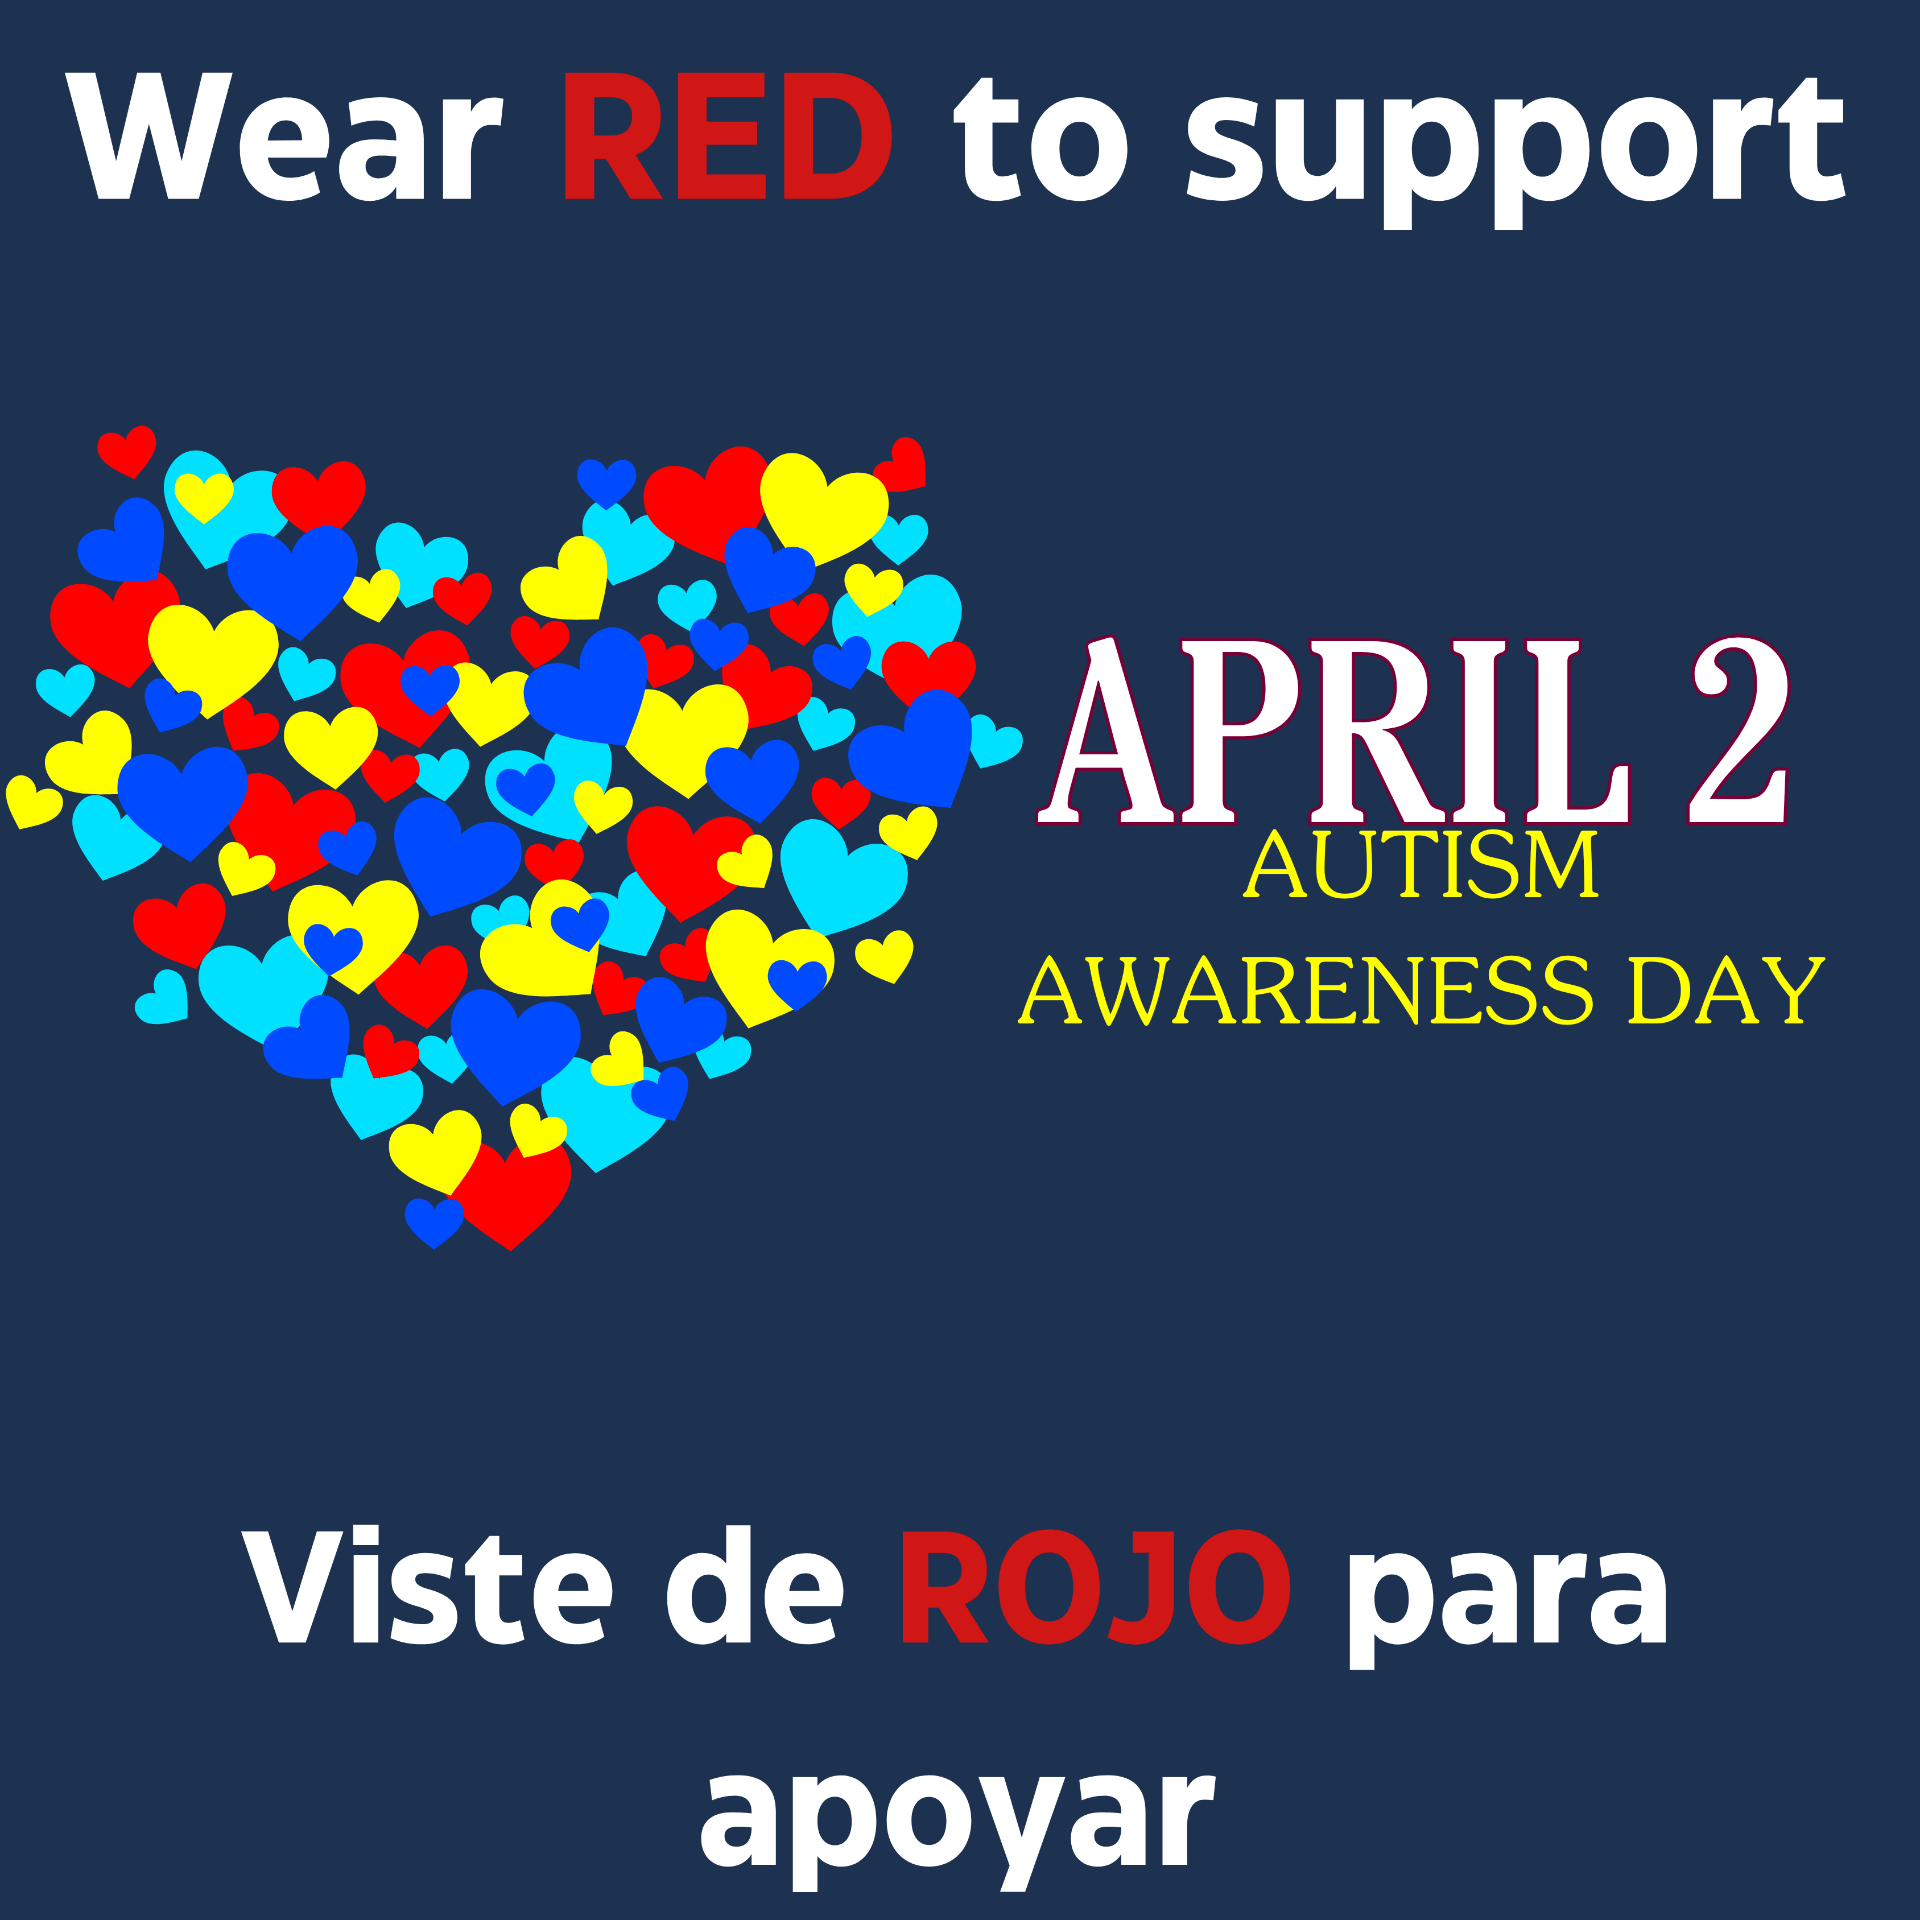 Wear Red on April 2 to support National Autism Awareness Day